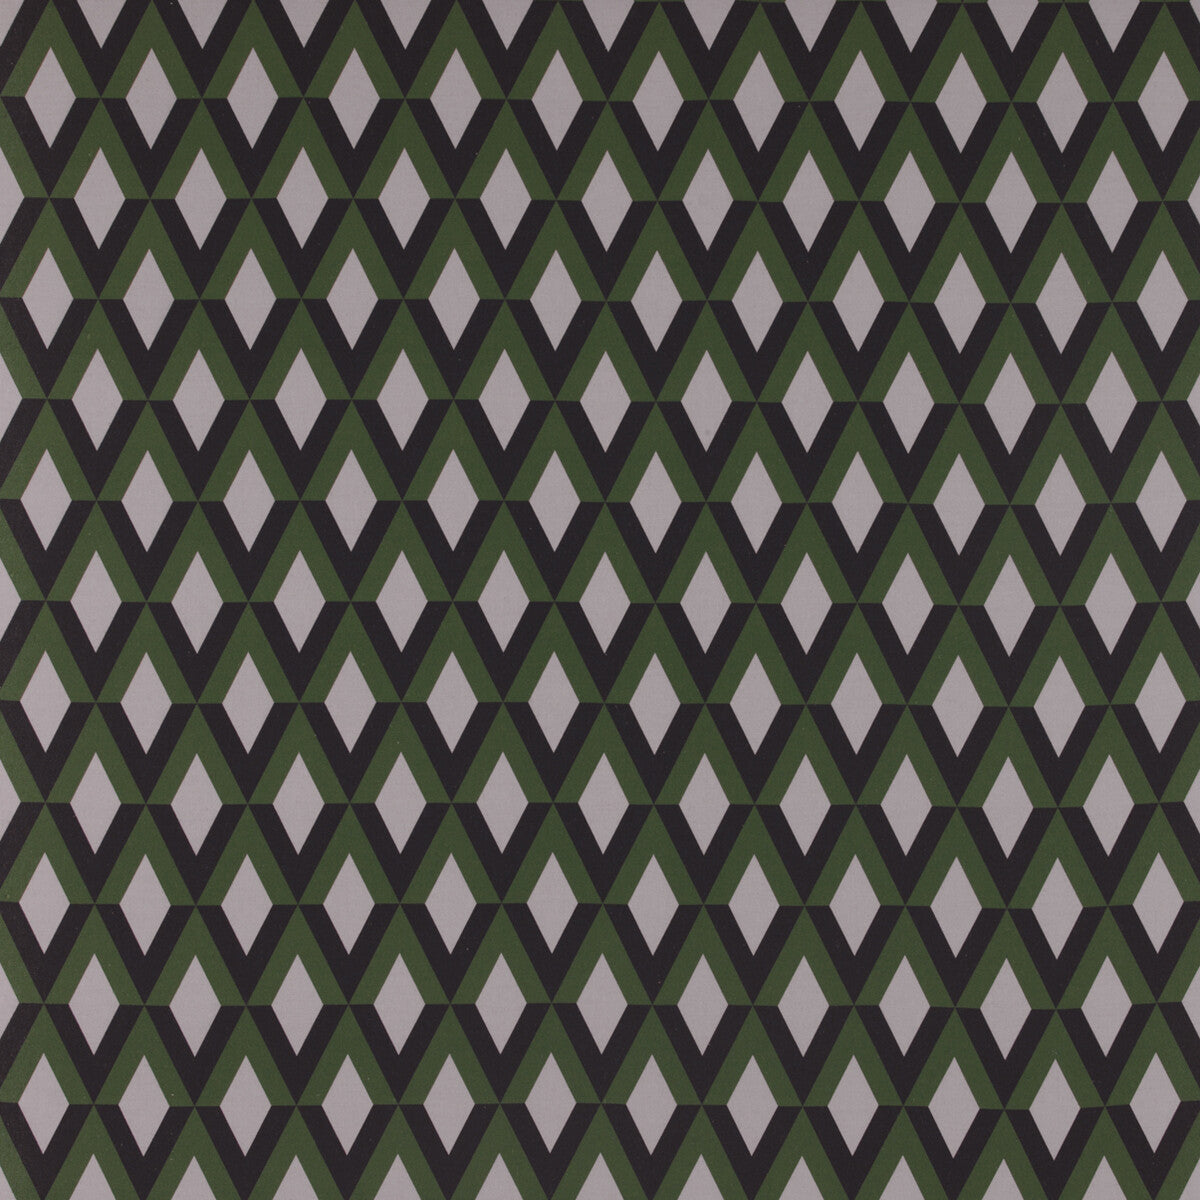 Prati fabric in verde color - pattern GDT5339.001.0 - by Gaston y Daniela in the Tierras collection